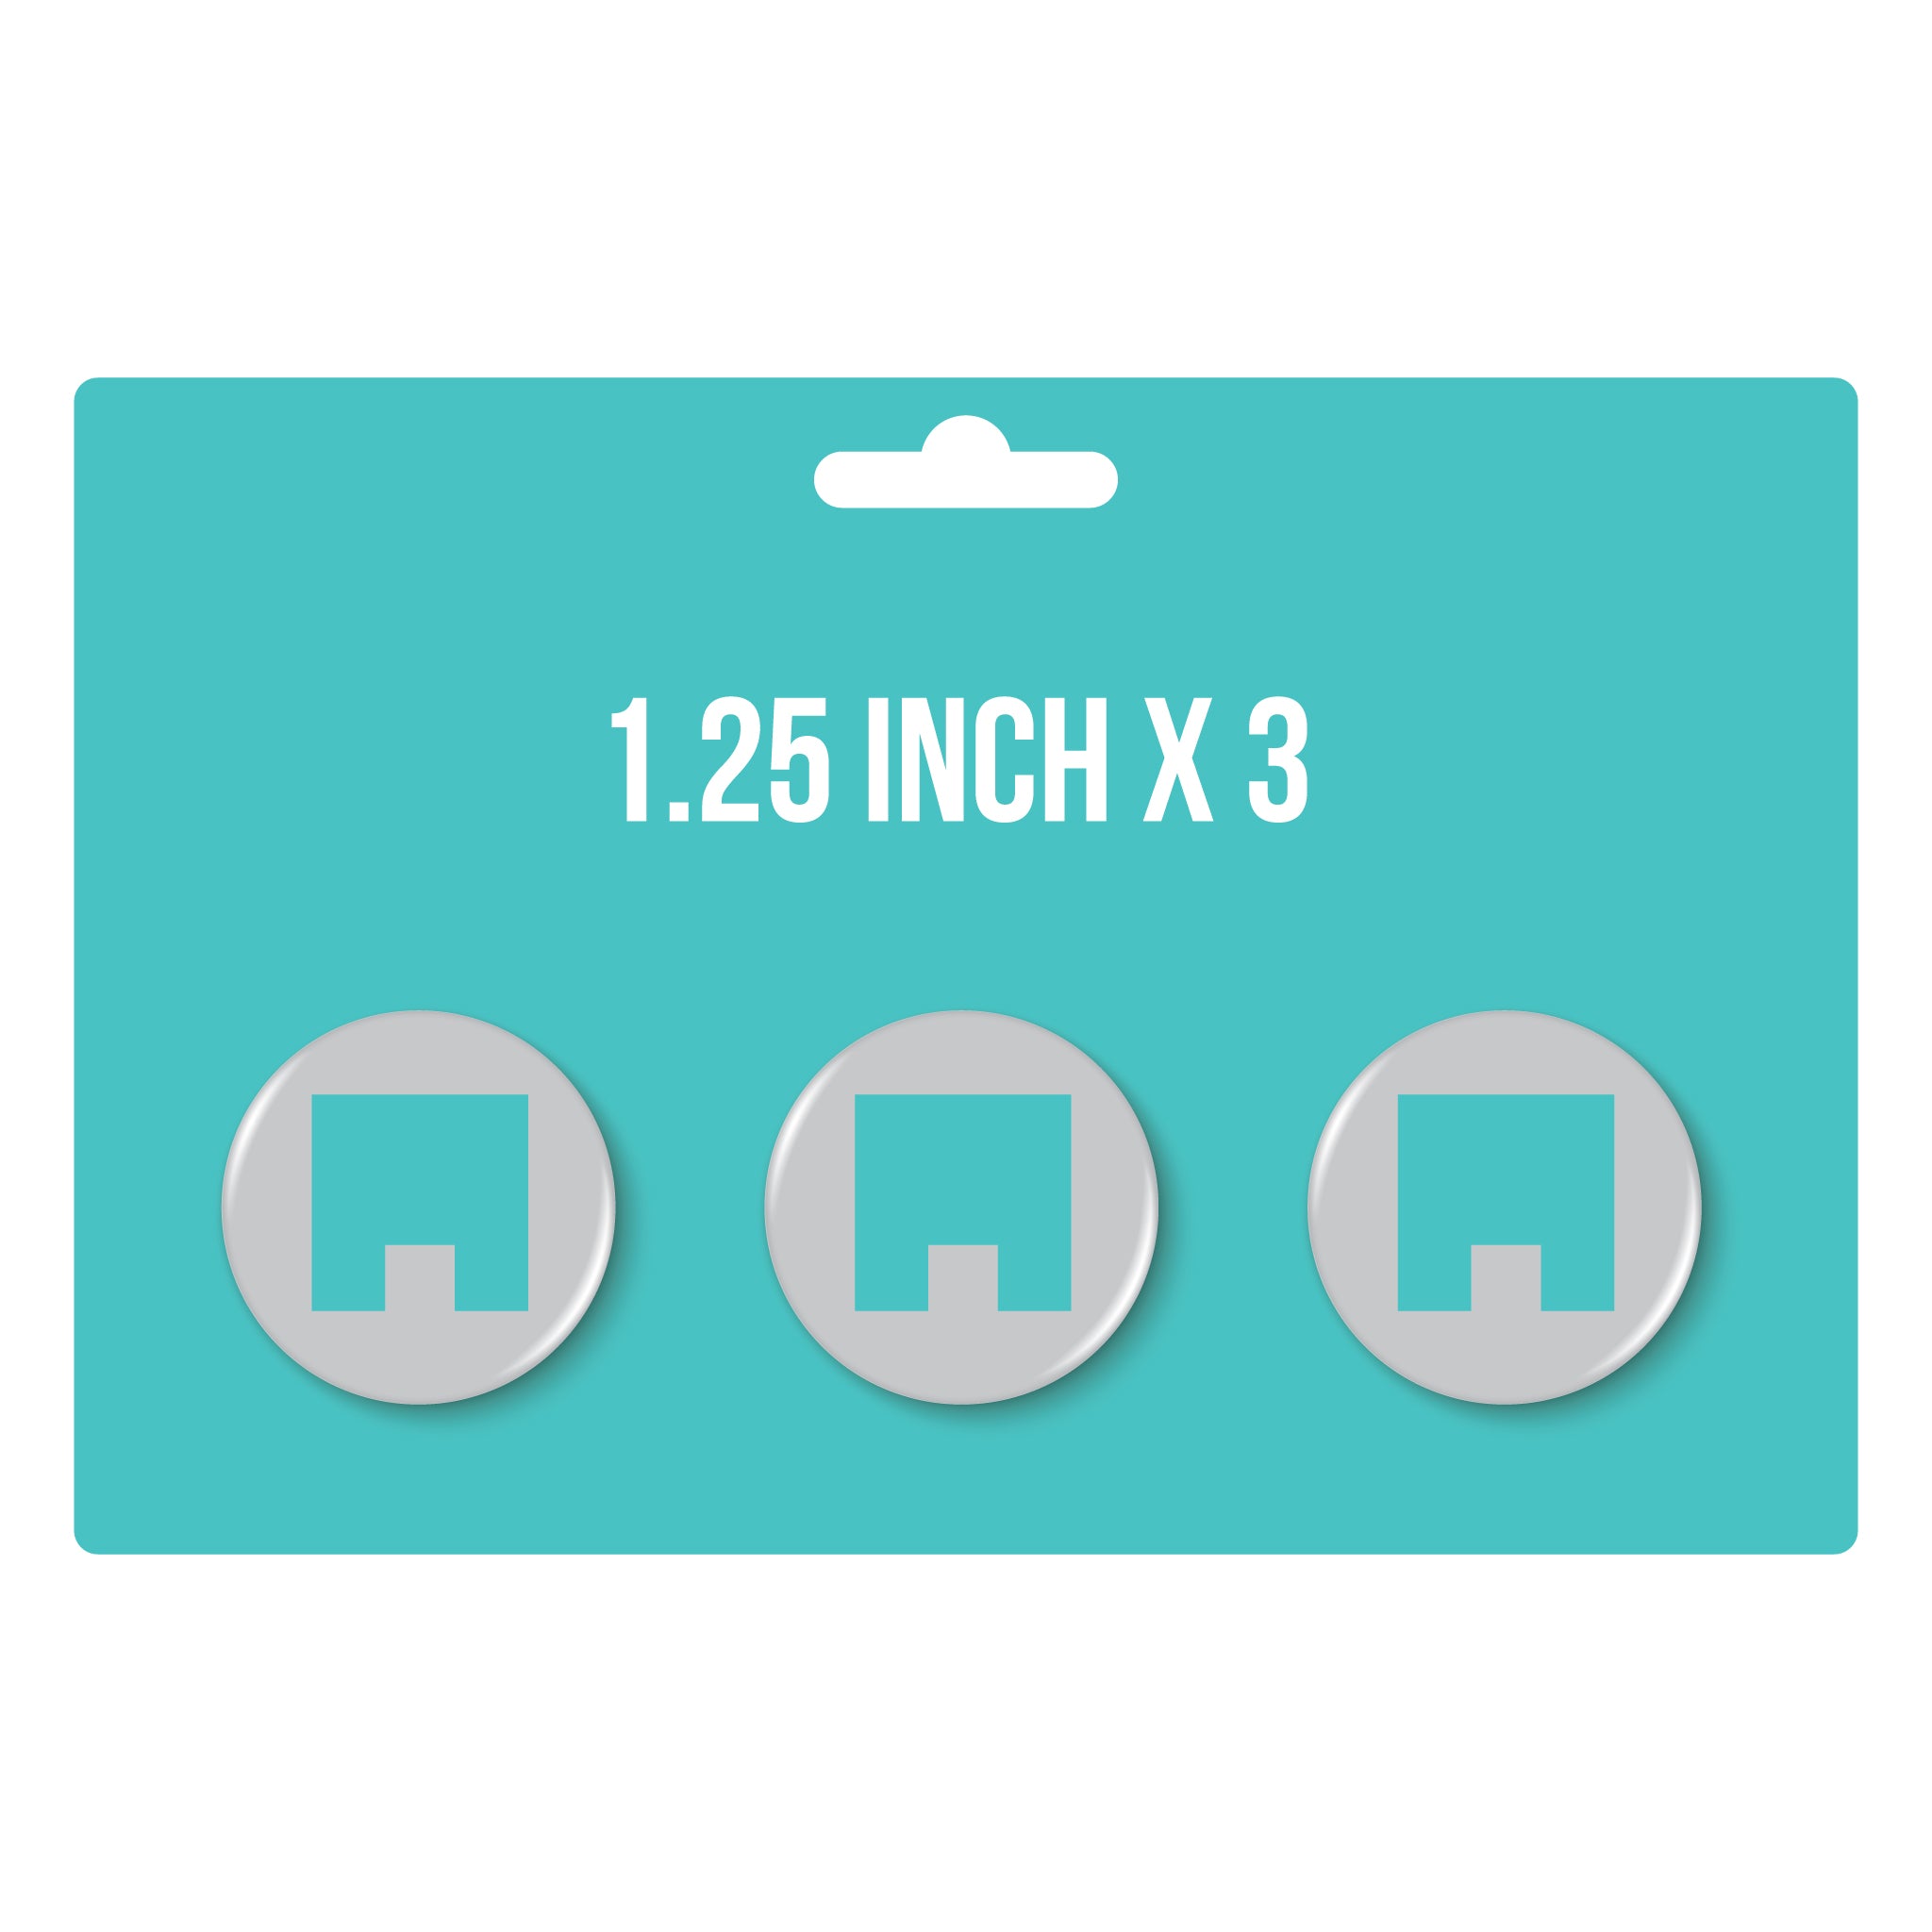 1.25" x 3 Button Pack